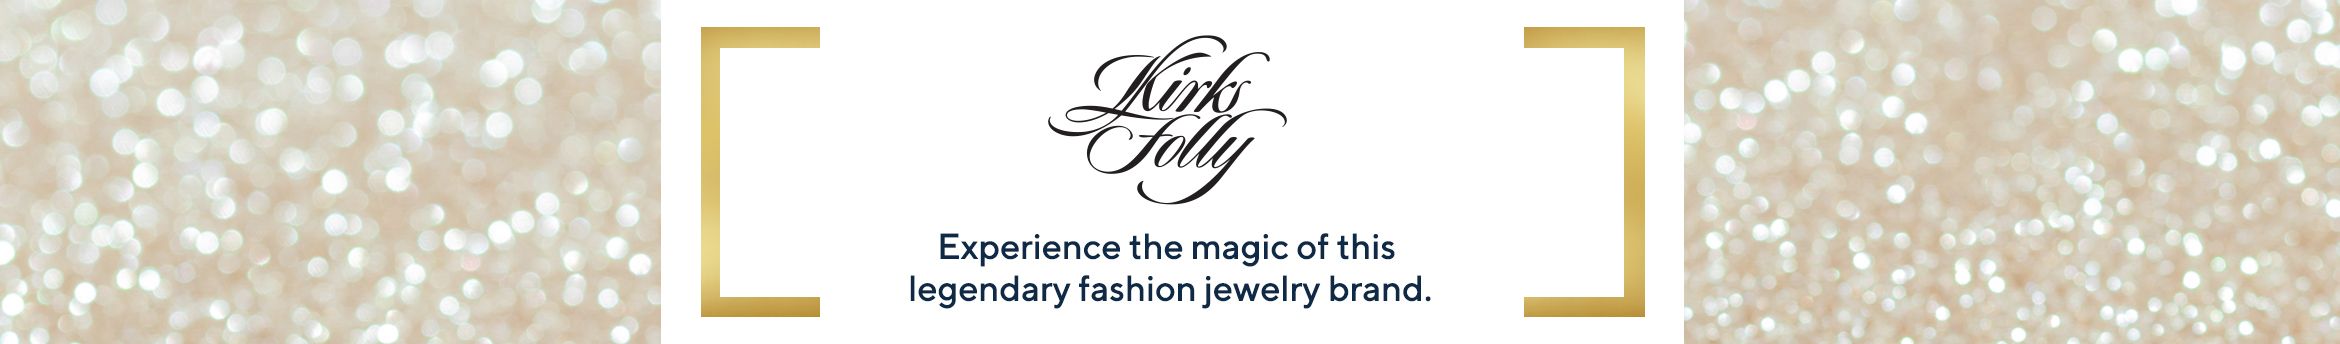 Kirks Folly.  Experience the magic of this legendary fashion jewelry brand.